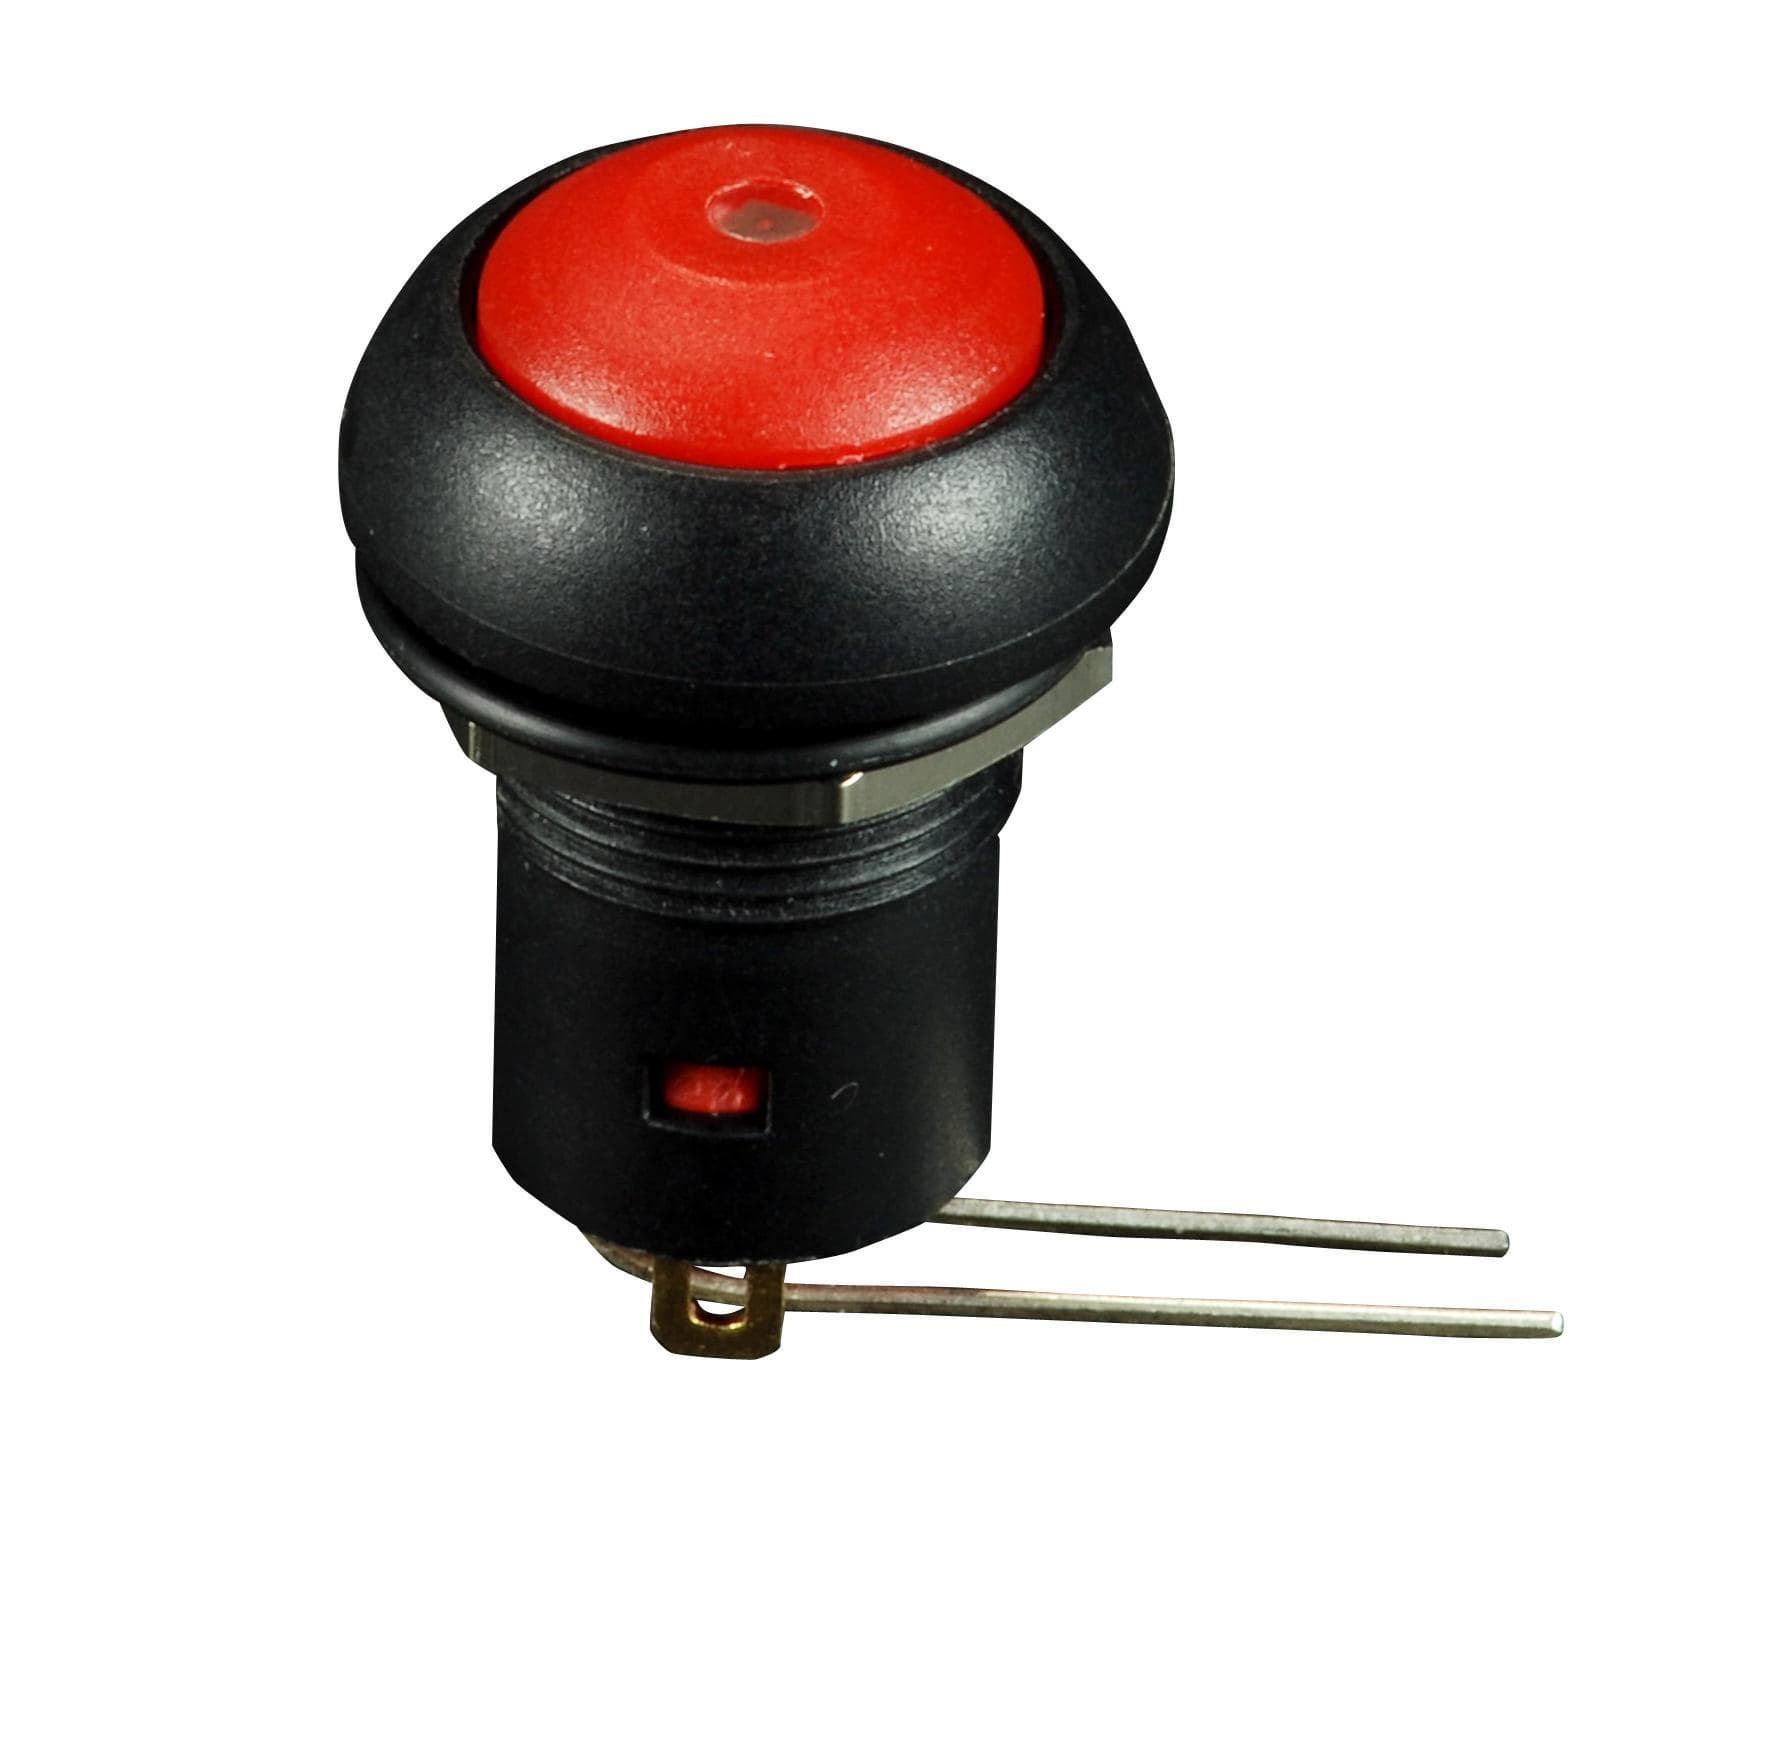 Push button switch